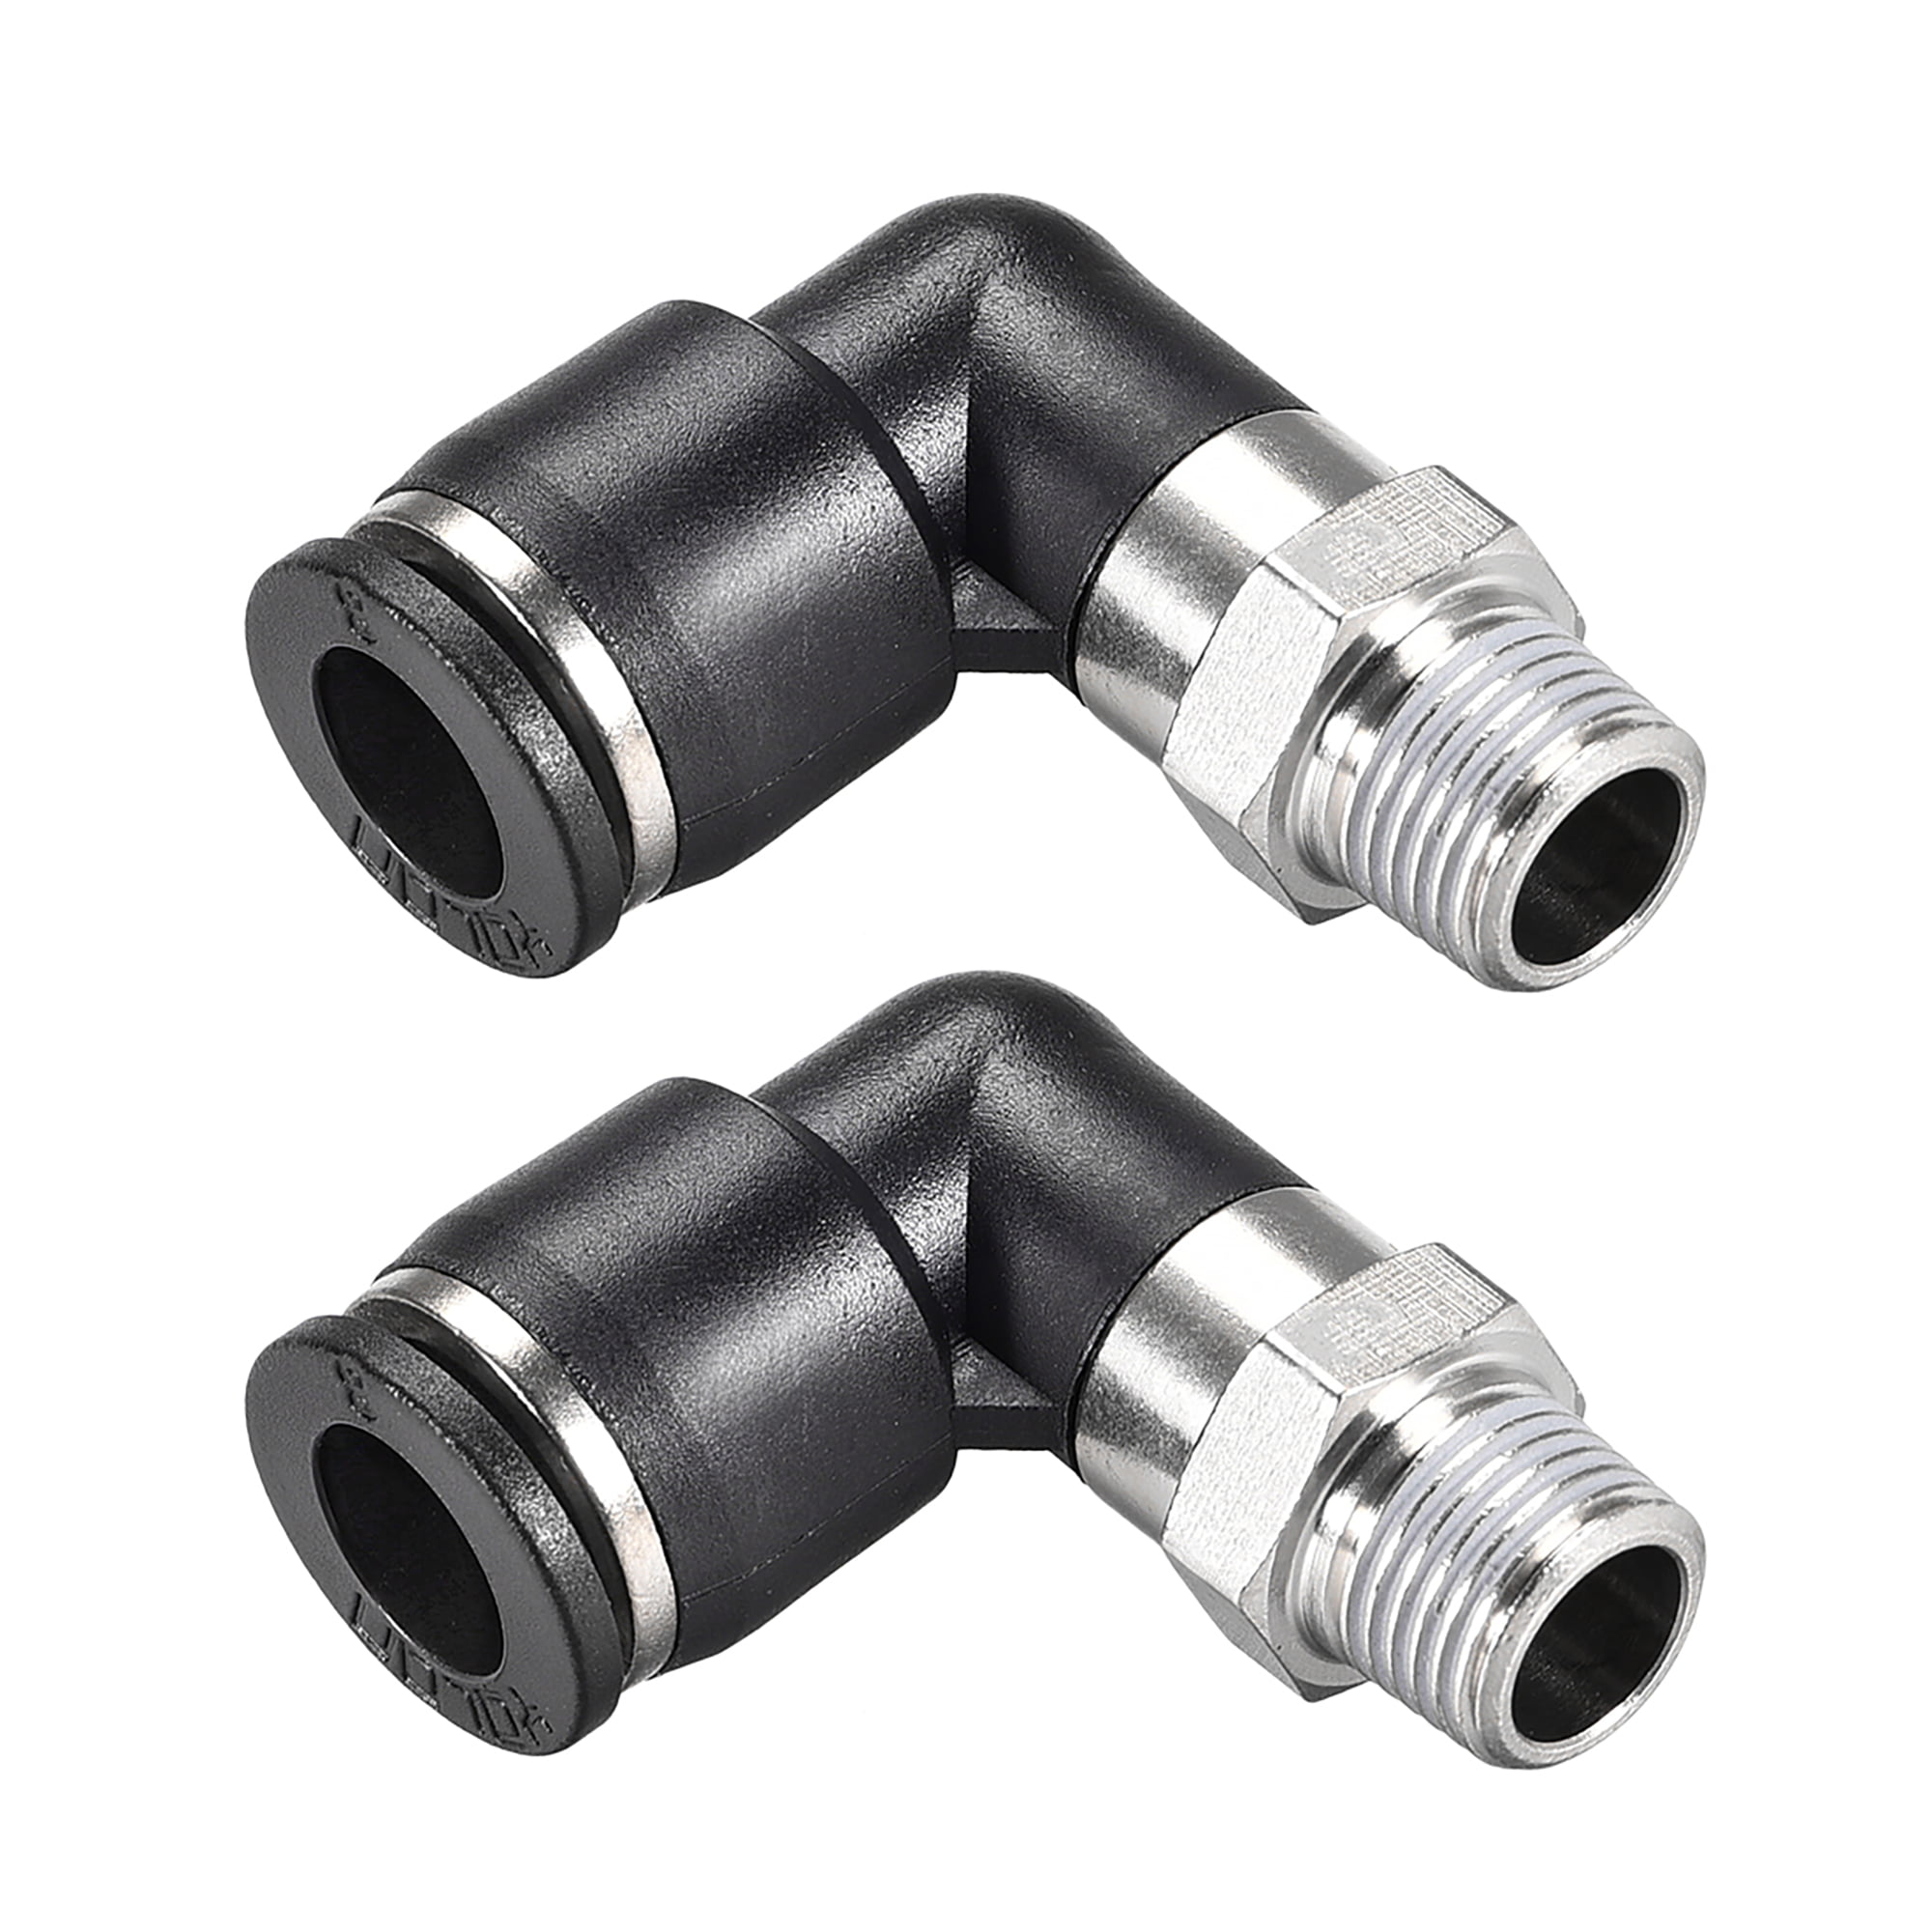 4 X Pneumatic Male Elbow Connector Tube OD 8mm Threaded 3/8" NPT Push In Fitting 